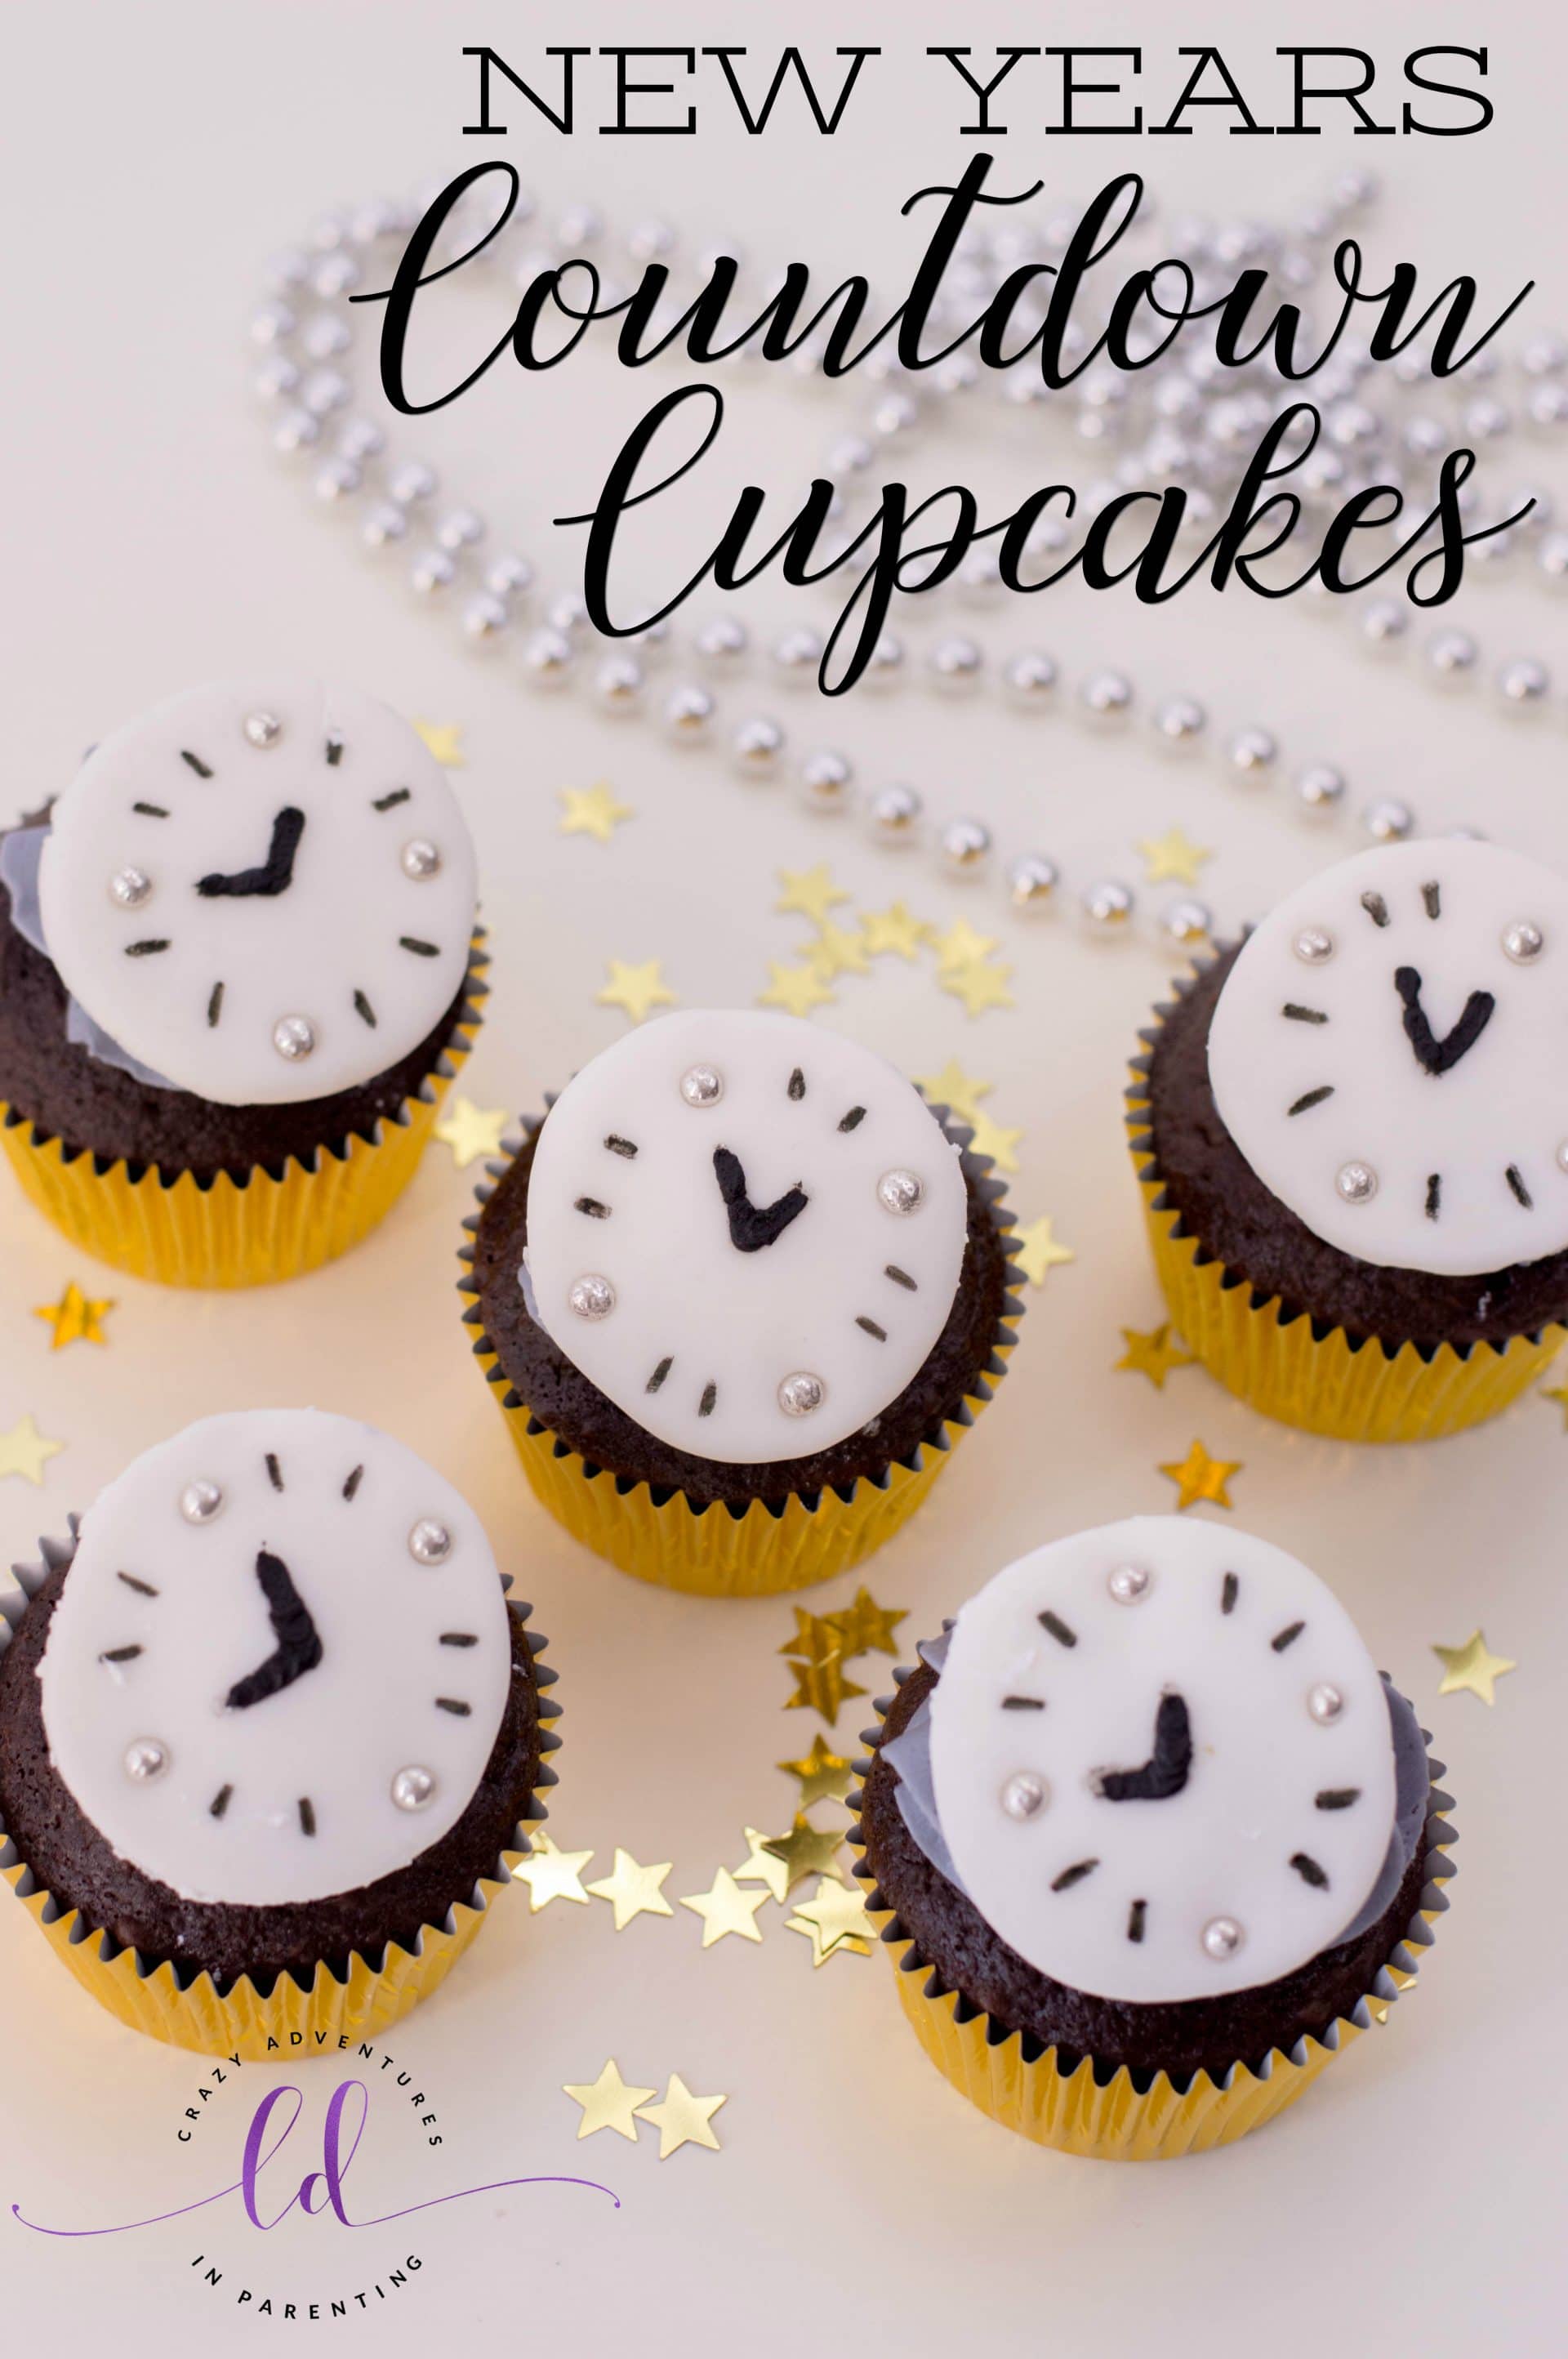 Countdown Cupcakes for New Year’s